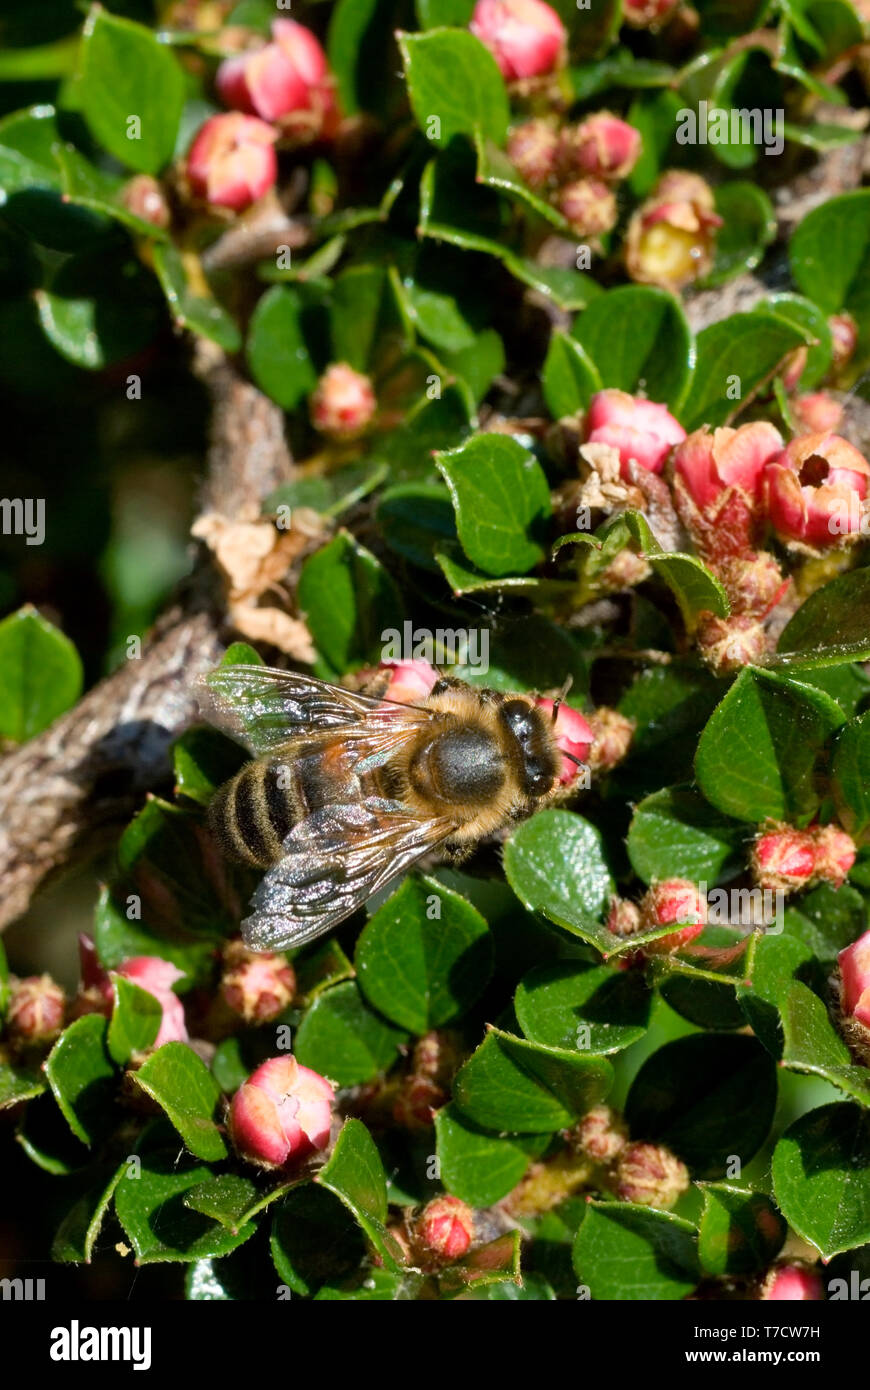 Honey Bee on Cotoneaster Flowers Stock Photo